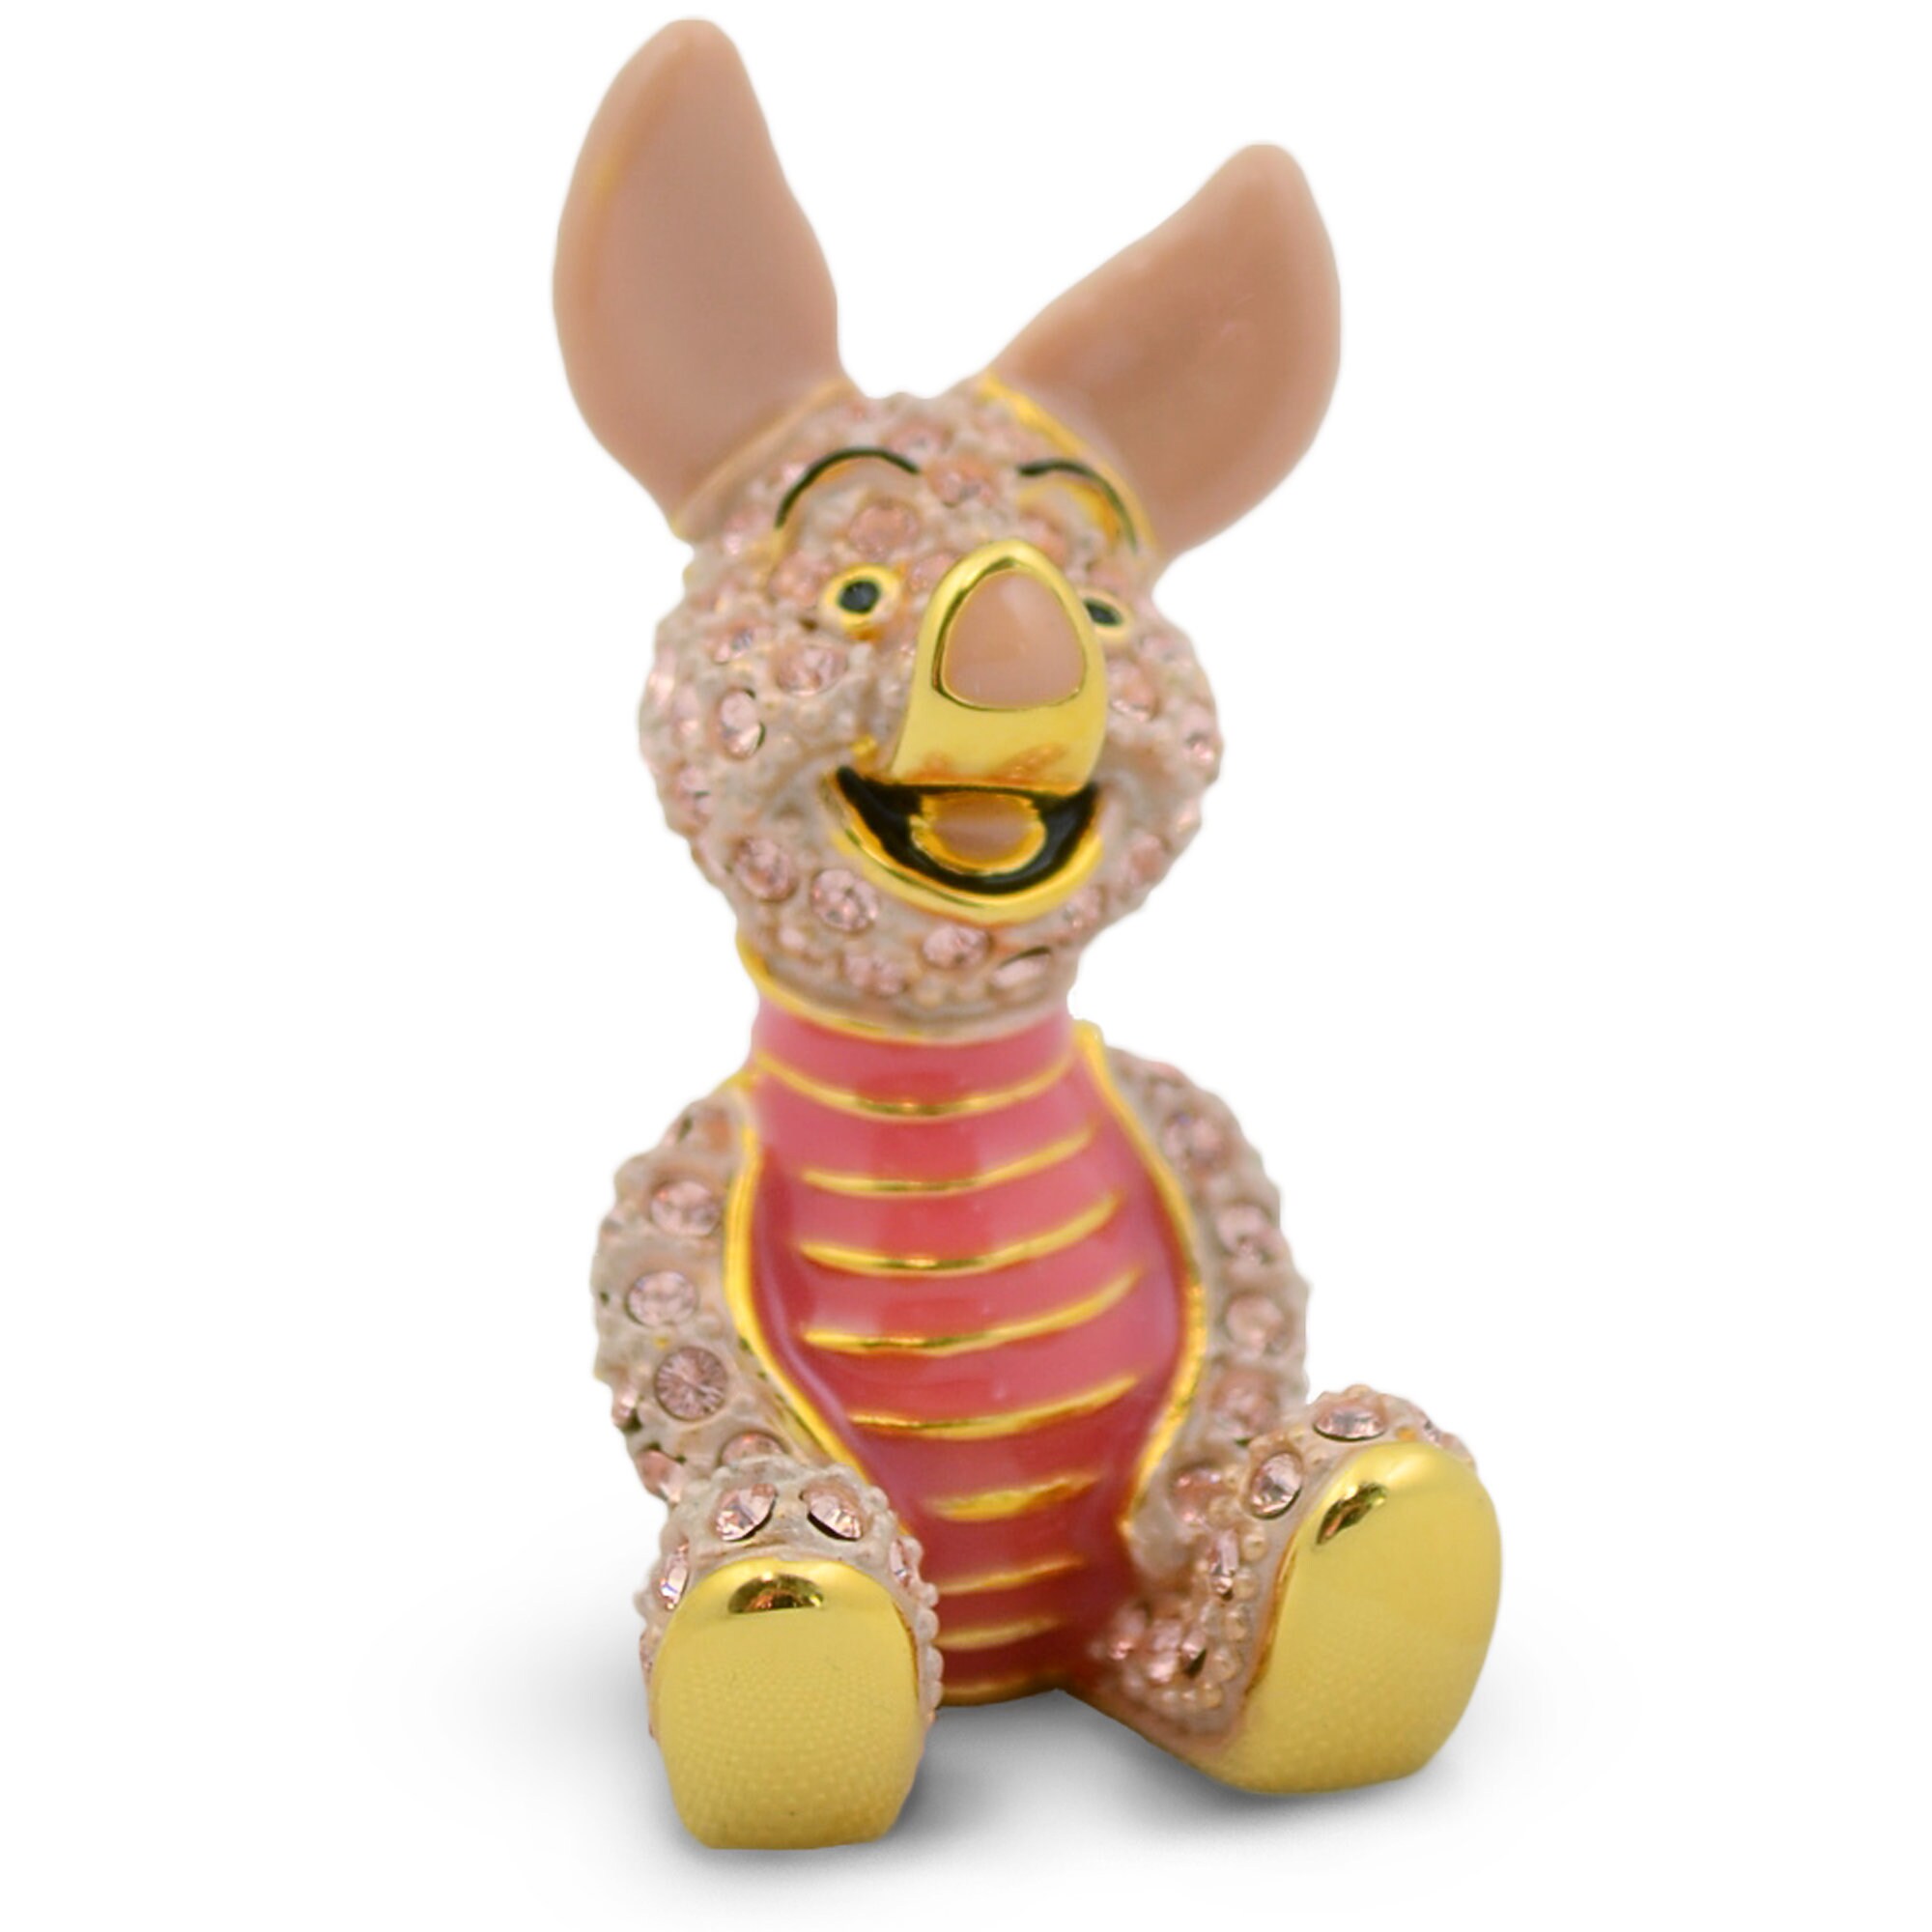 Limited Edition Piglet Jeweled Figurine by Arribas